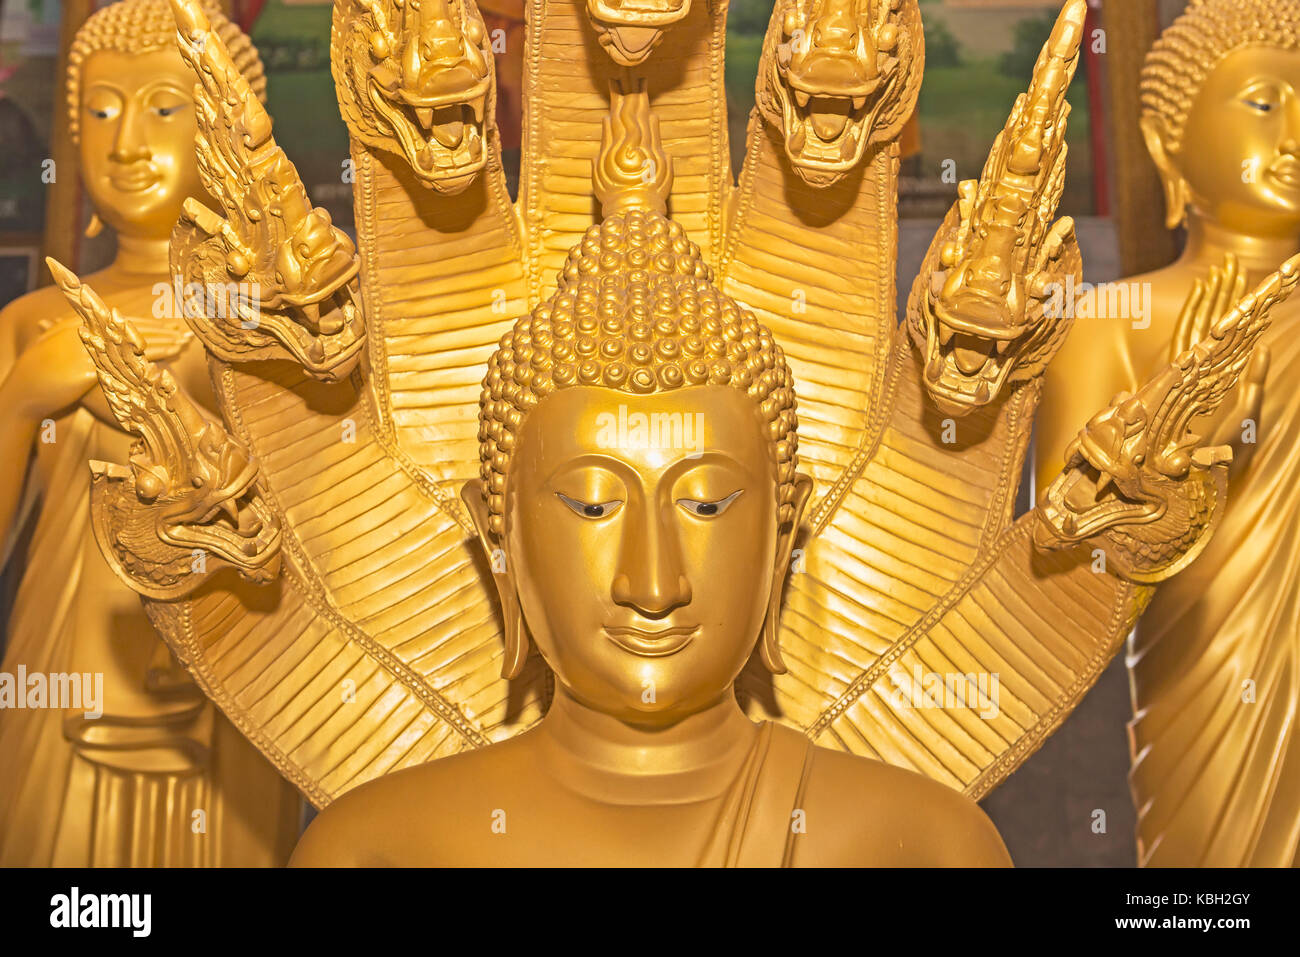 Phuket, Thailand July 4, 2017 : Portrait of a golden Buddha statue located in the interior of Wat Chalong temple also called big Chedi is located in t Stock Photo